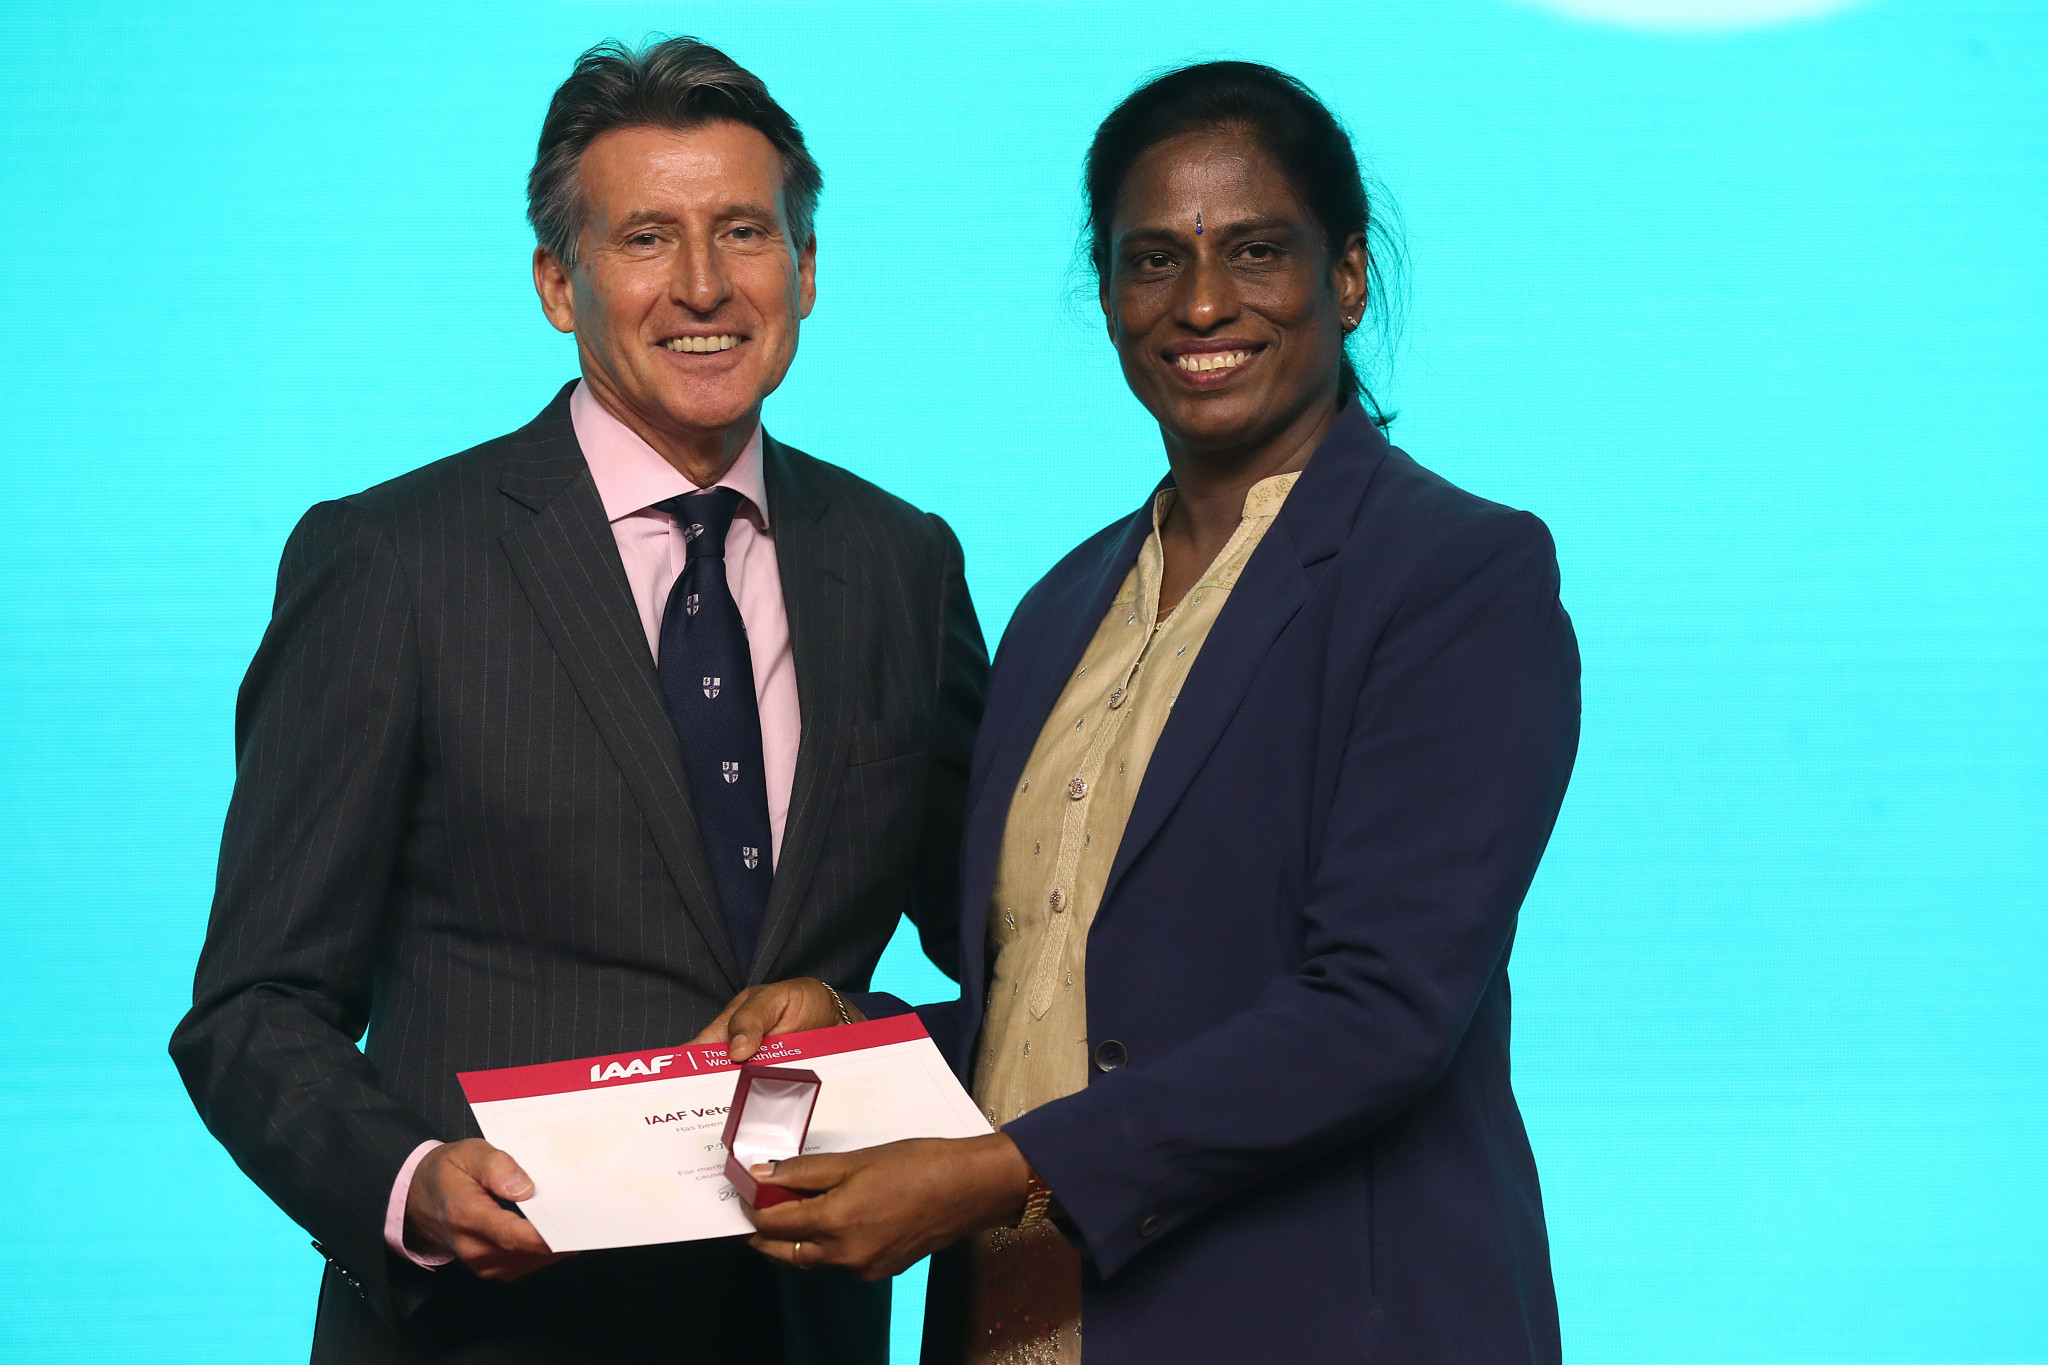 Indian track and field legend PT Usha, right, has confirmed that she will be running for the post of President of IOA ©Getty Images